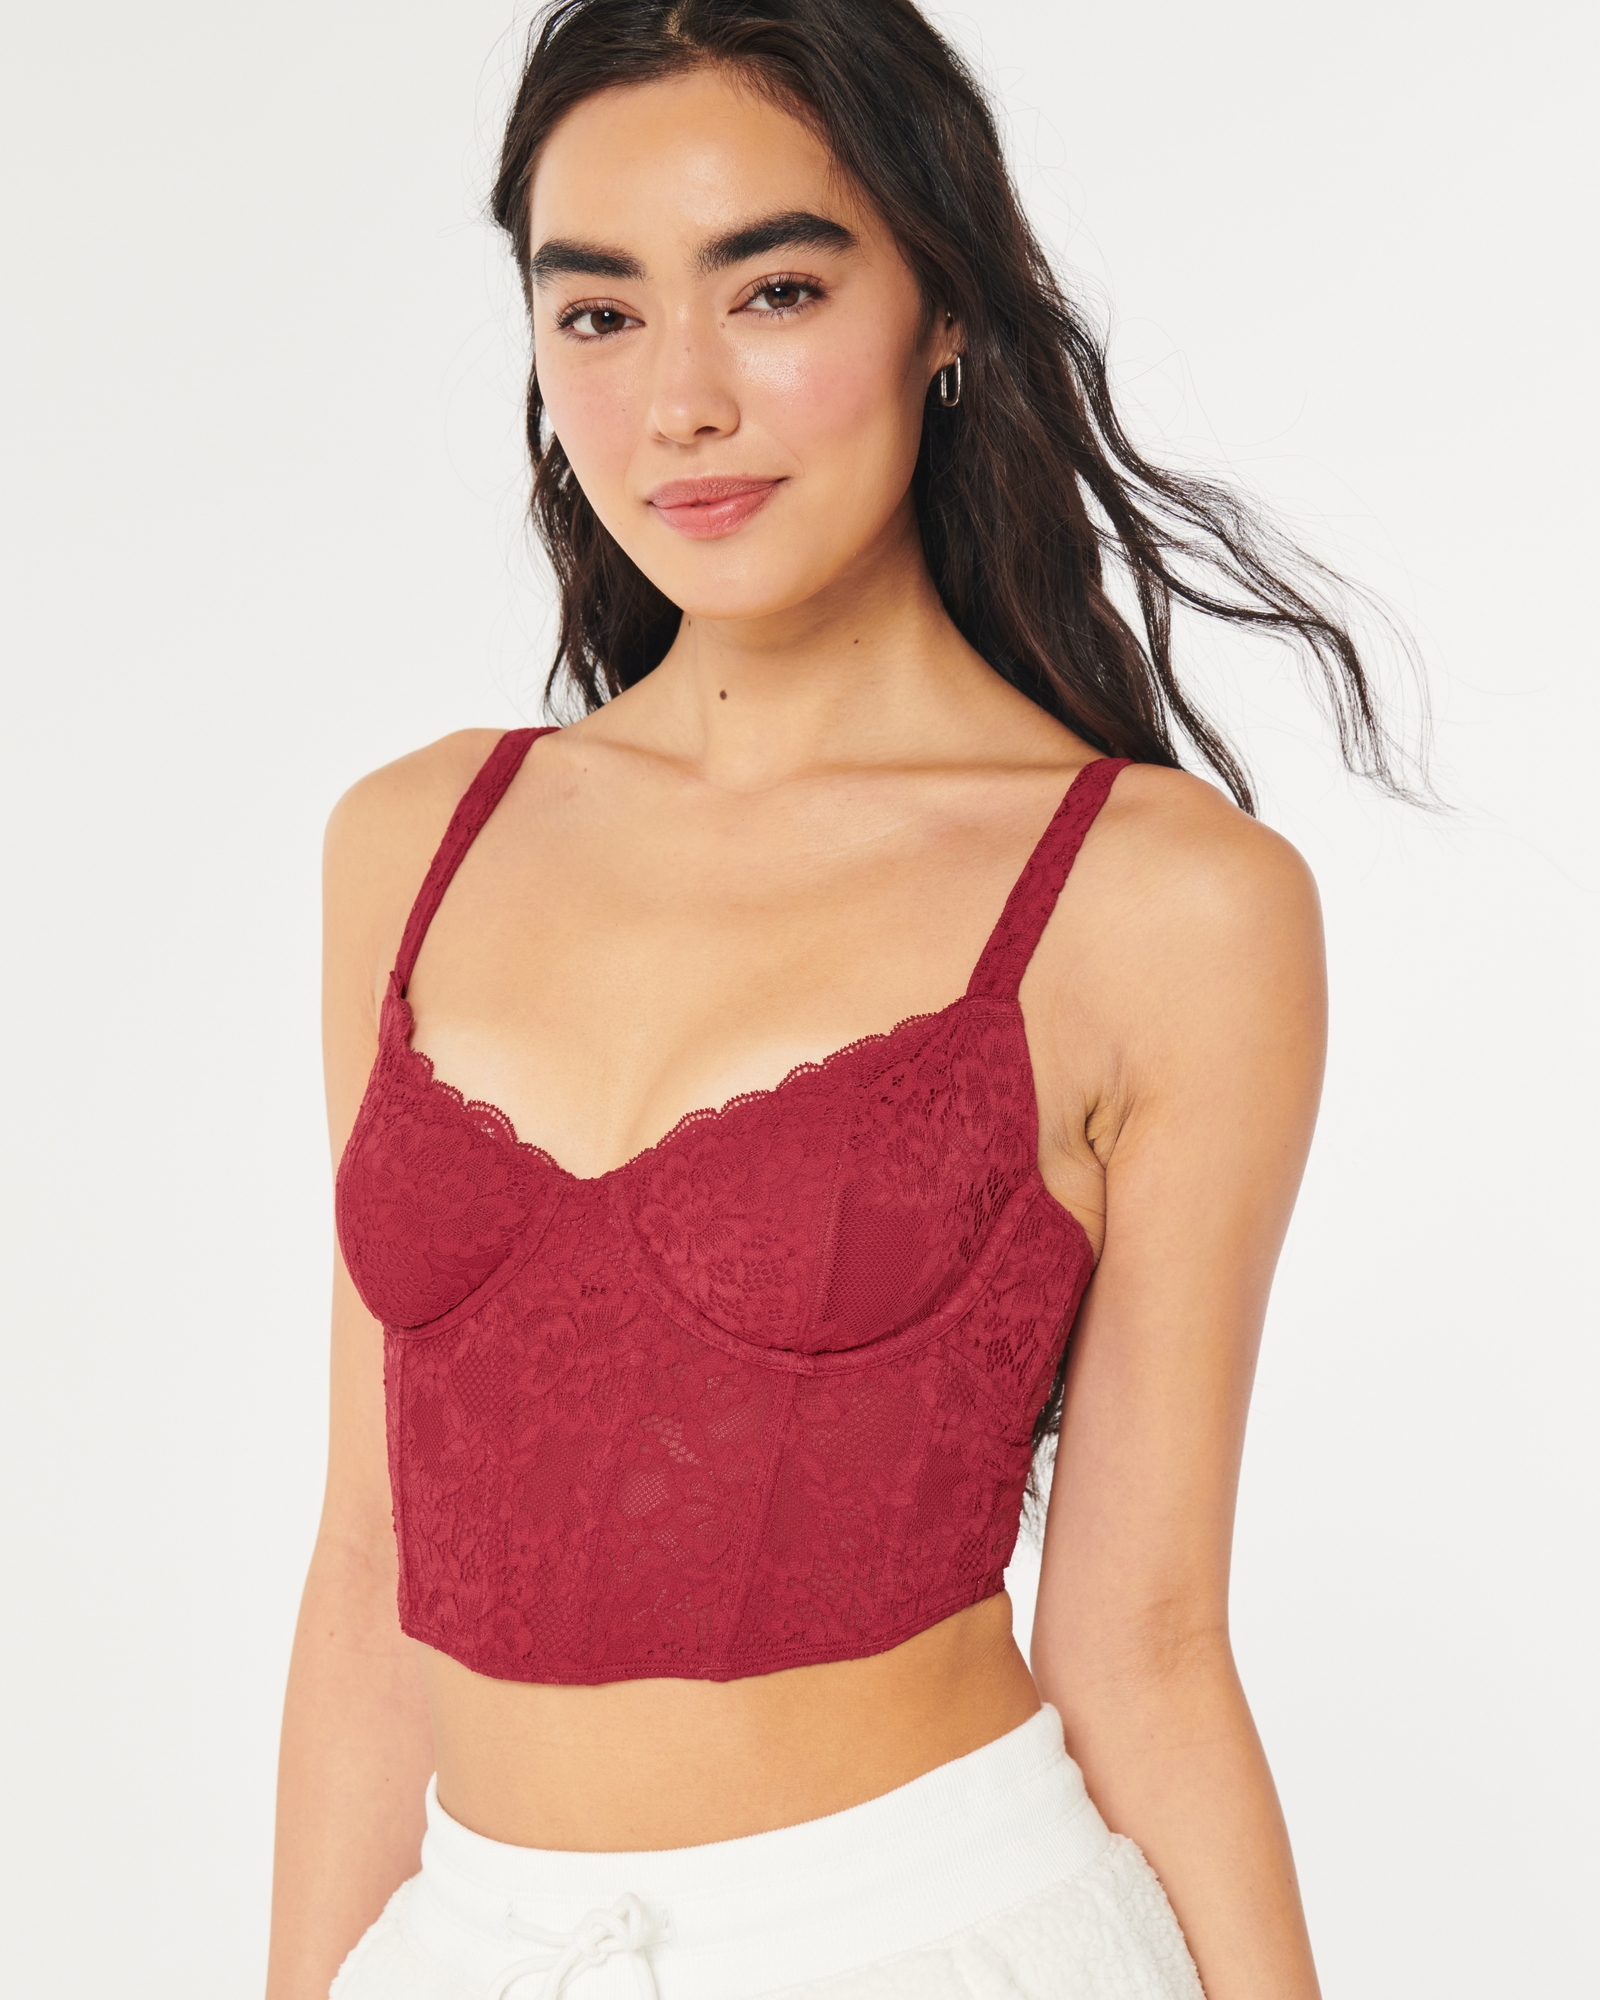 Women's Gilly Hicks Lace Bustier, Women's Tops